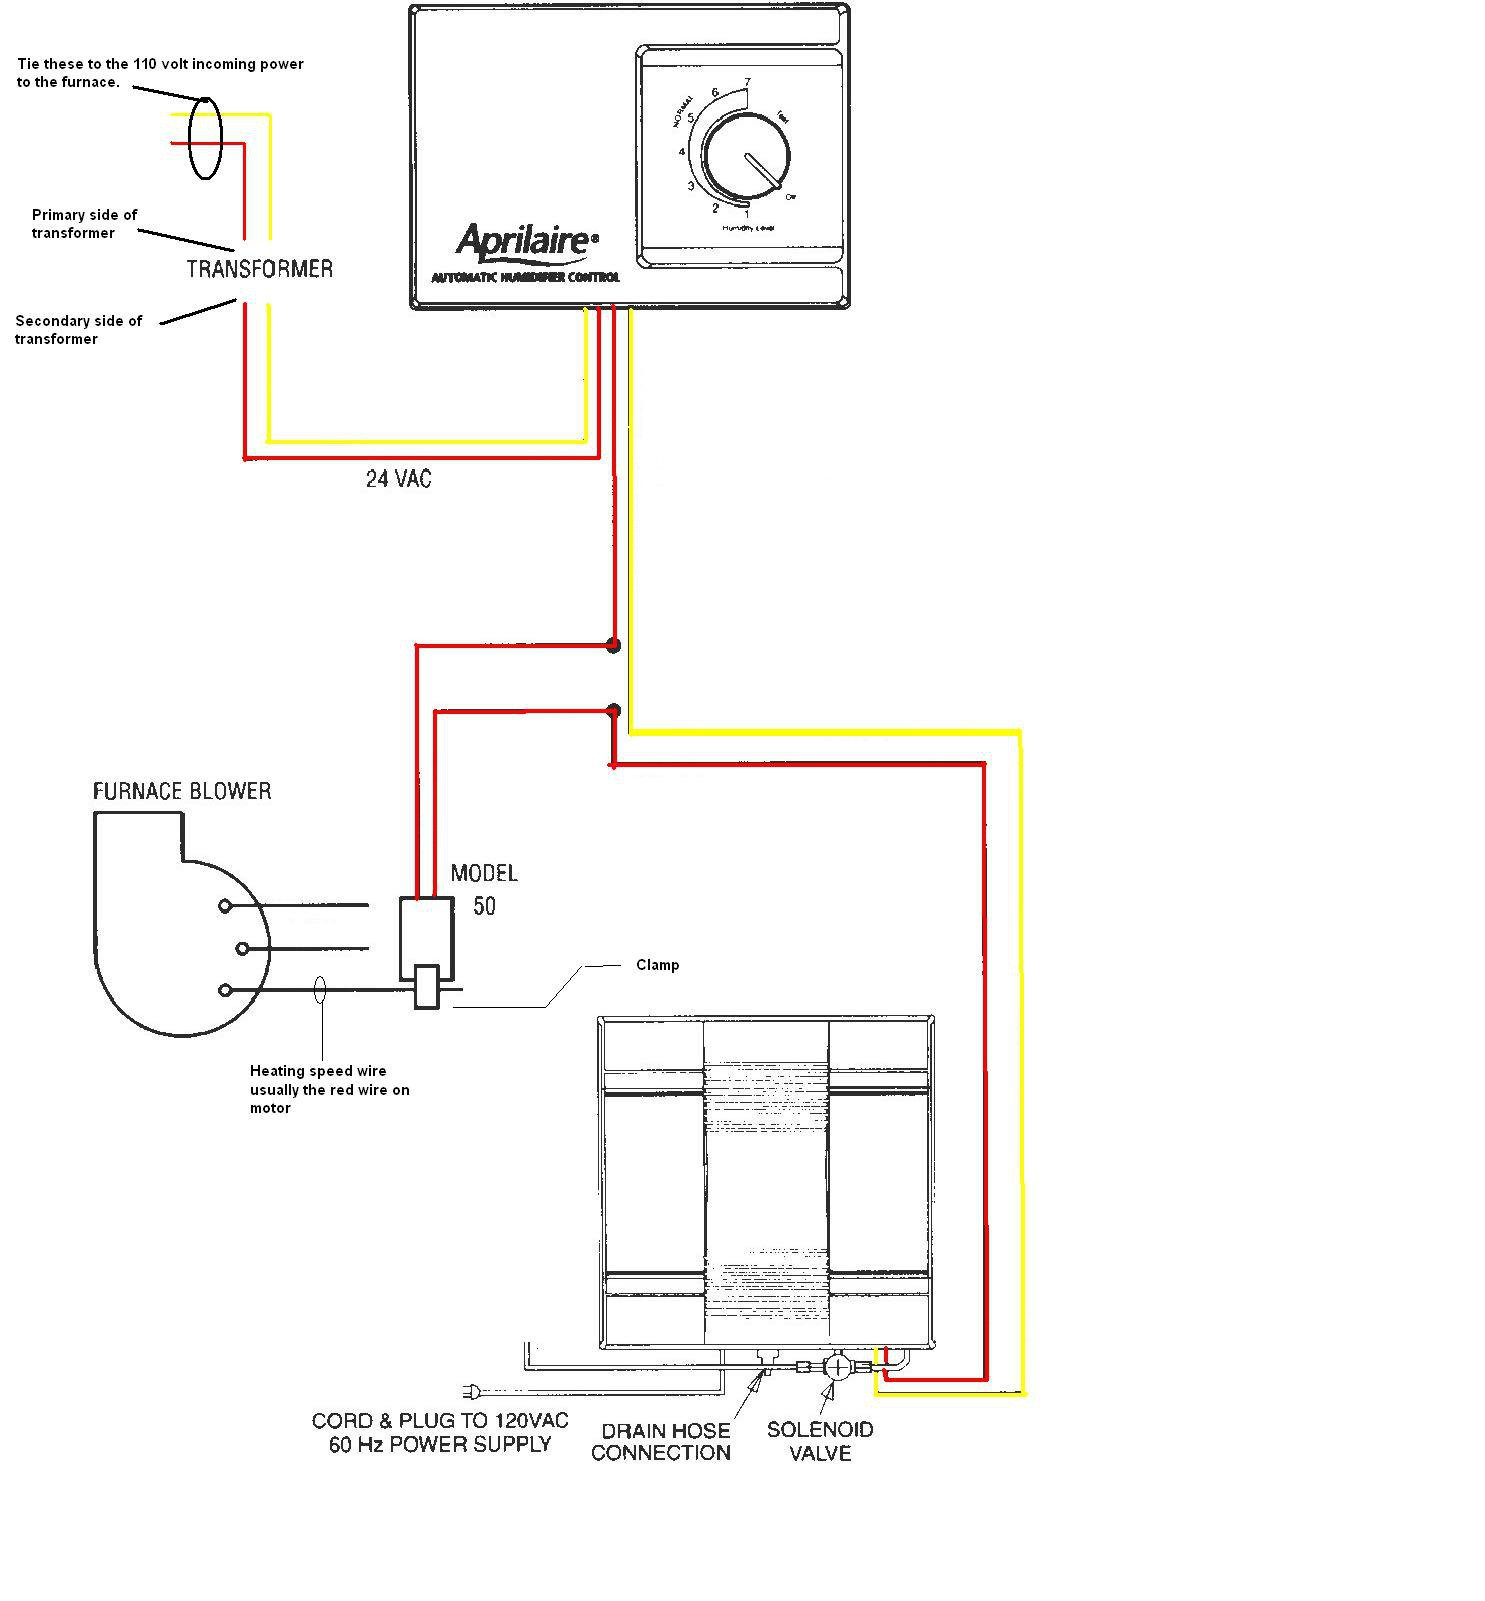 Honeywell Power Humidifier Wiring Diagram Collection | Wiring Diagram